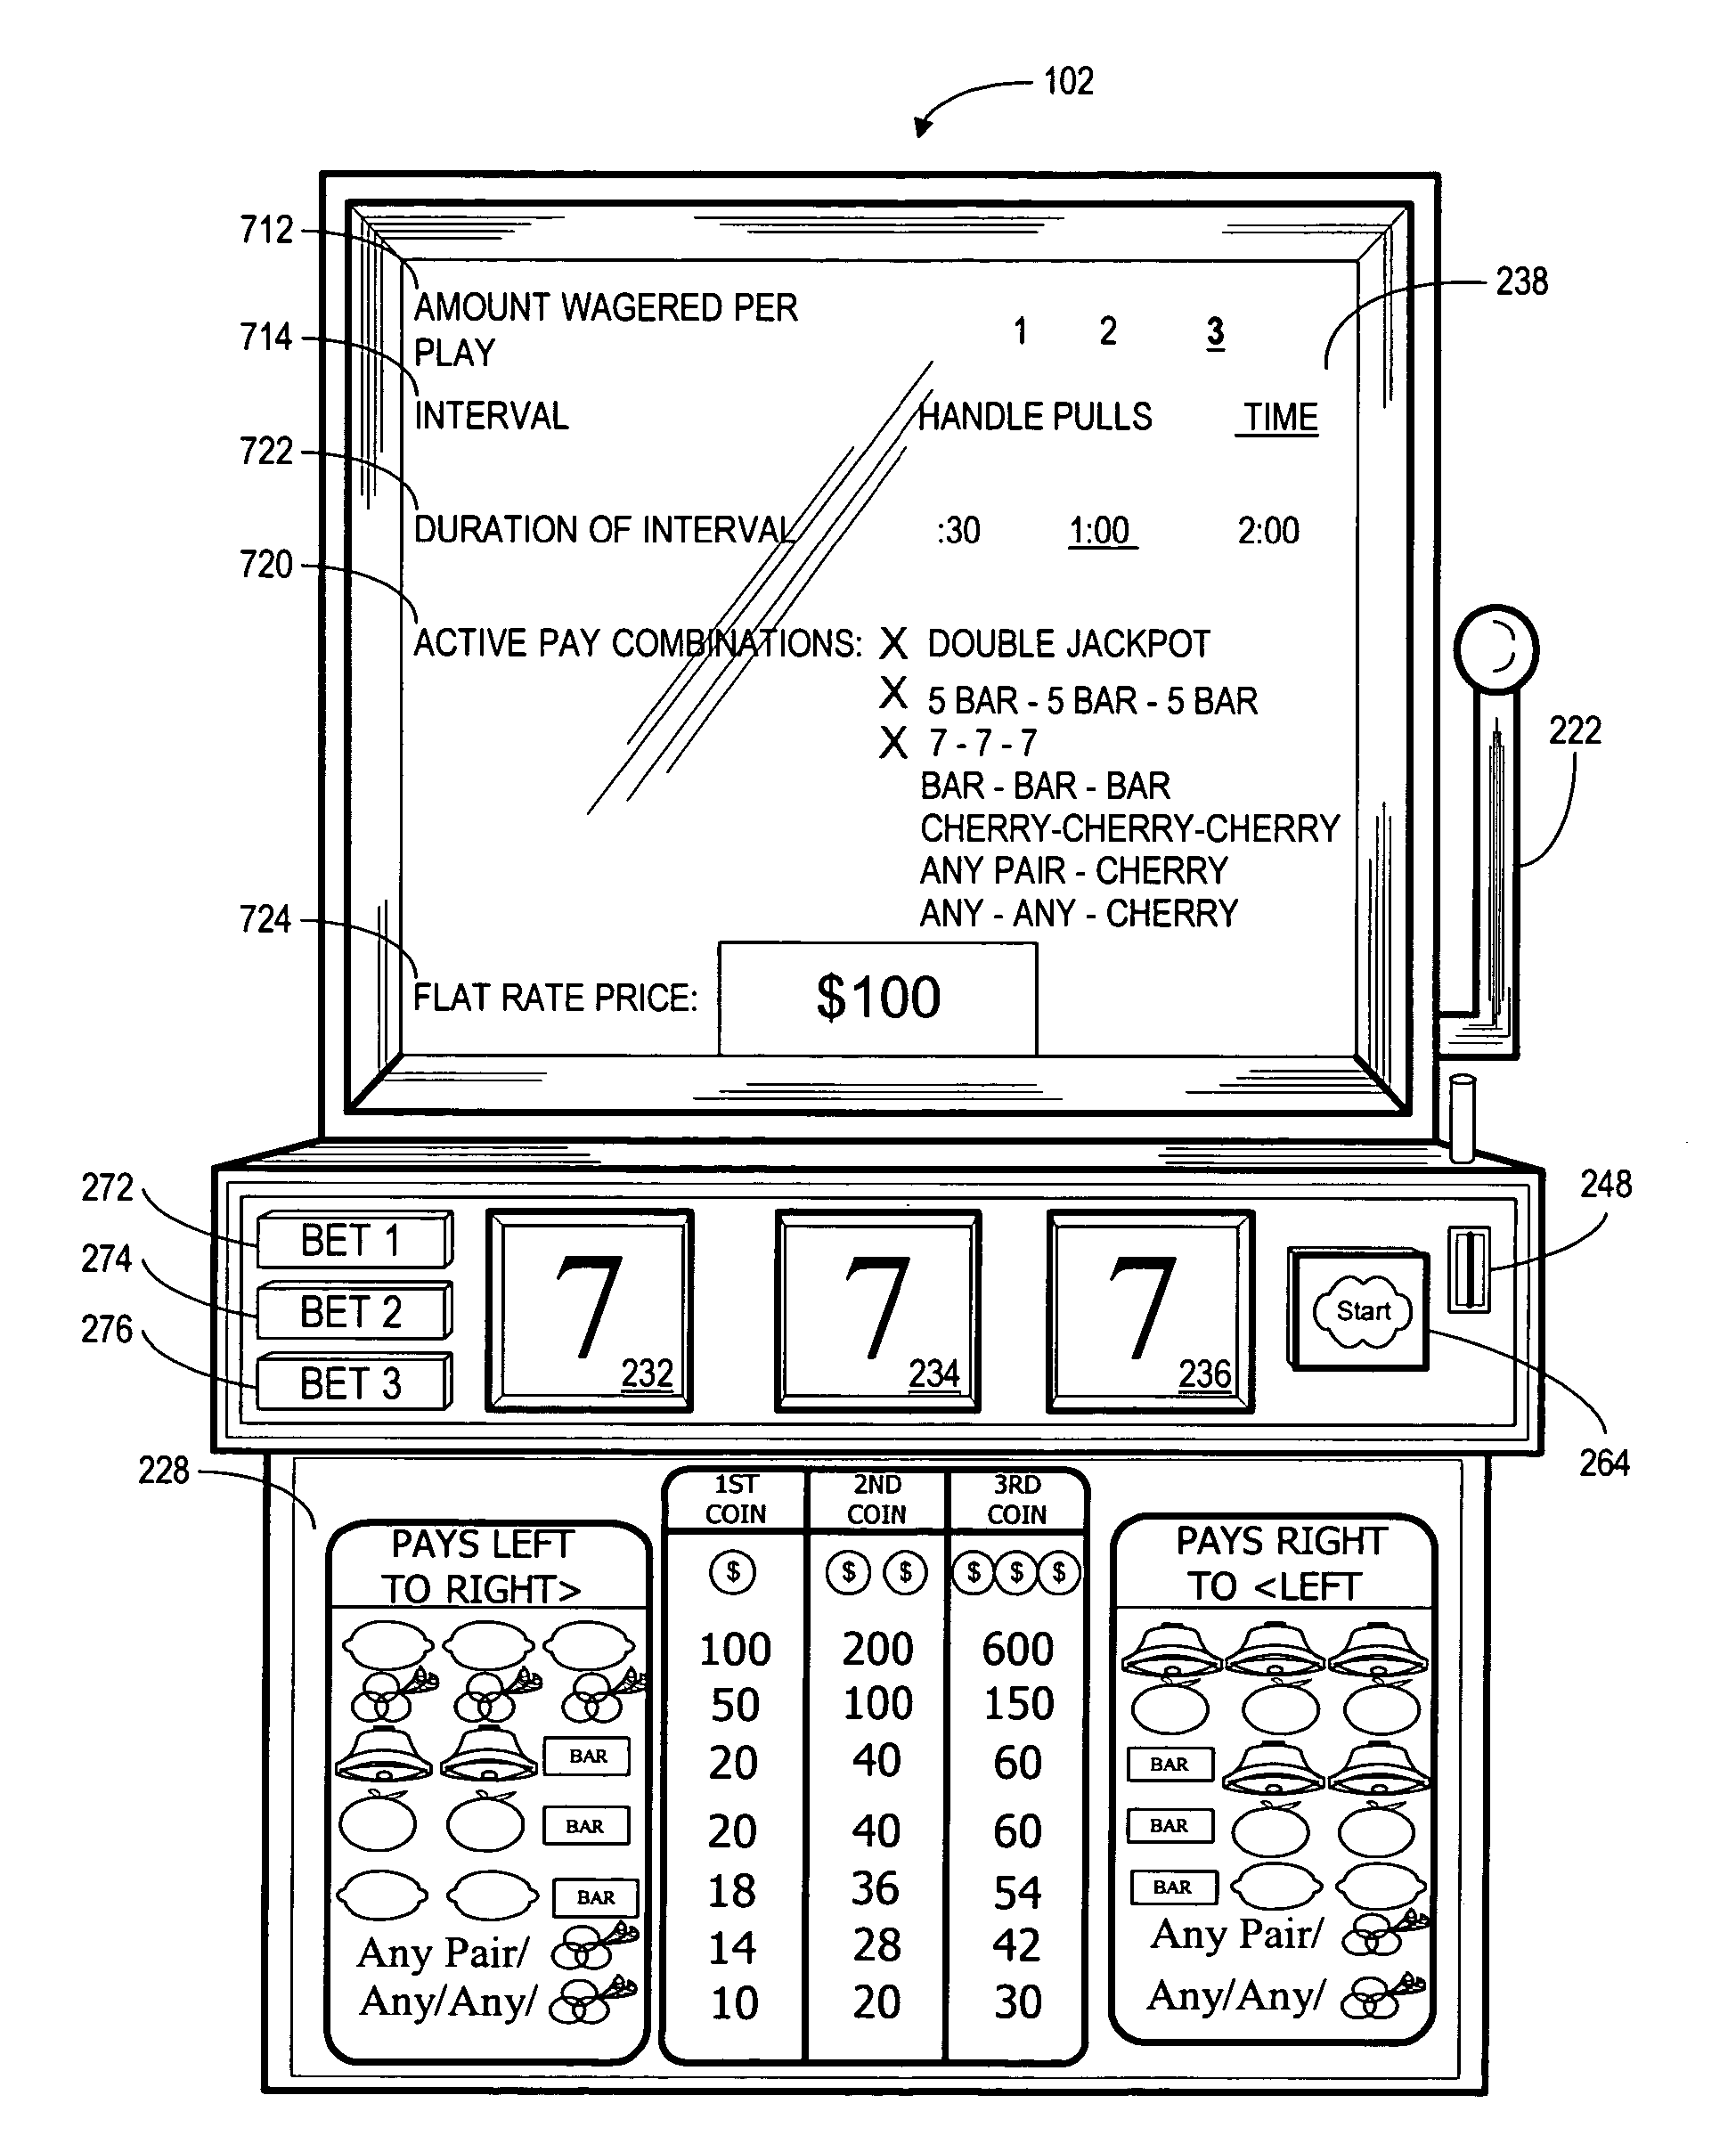 Gaming device for a flat rate play session and method of operating same